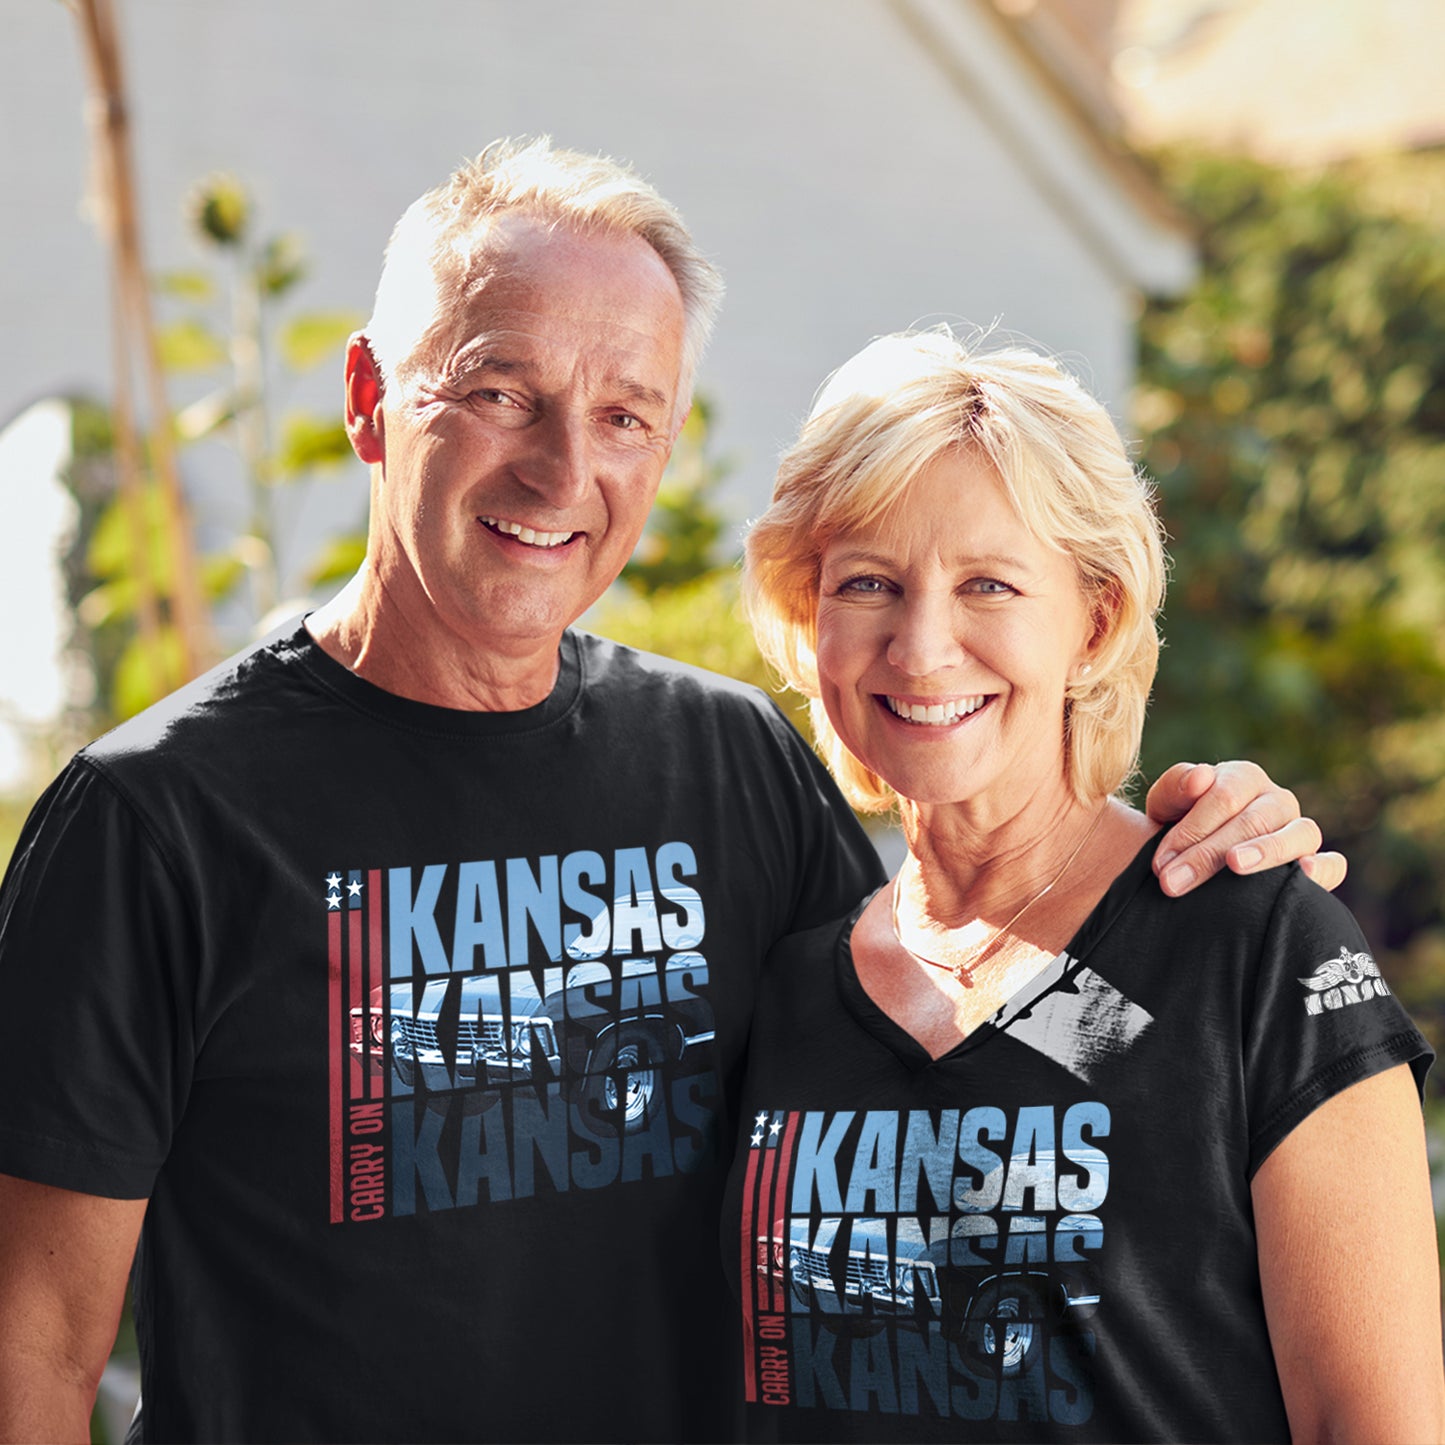 Two models side by side wearing black tee shirts. In the front of each shirt is blue text that says “Kansas Kansas Kansas,” with a black Chevy Impala superimposed on the text. On the left of the text are three red stripes with red text saying “carry on.”